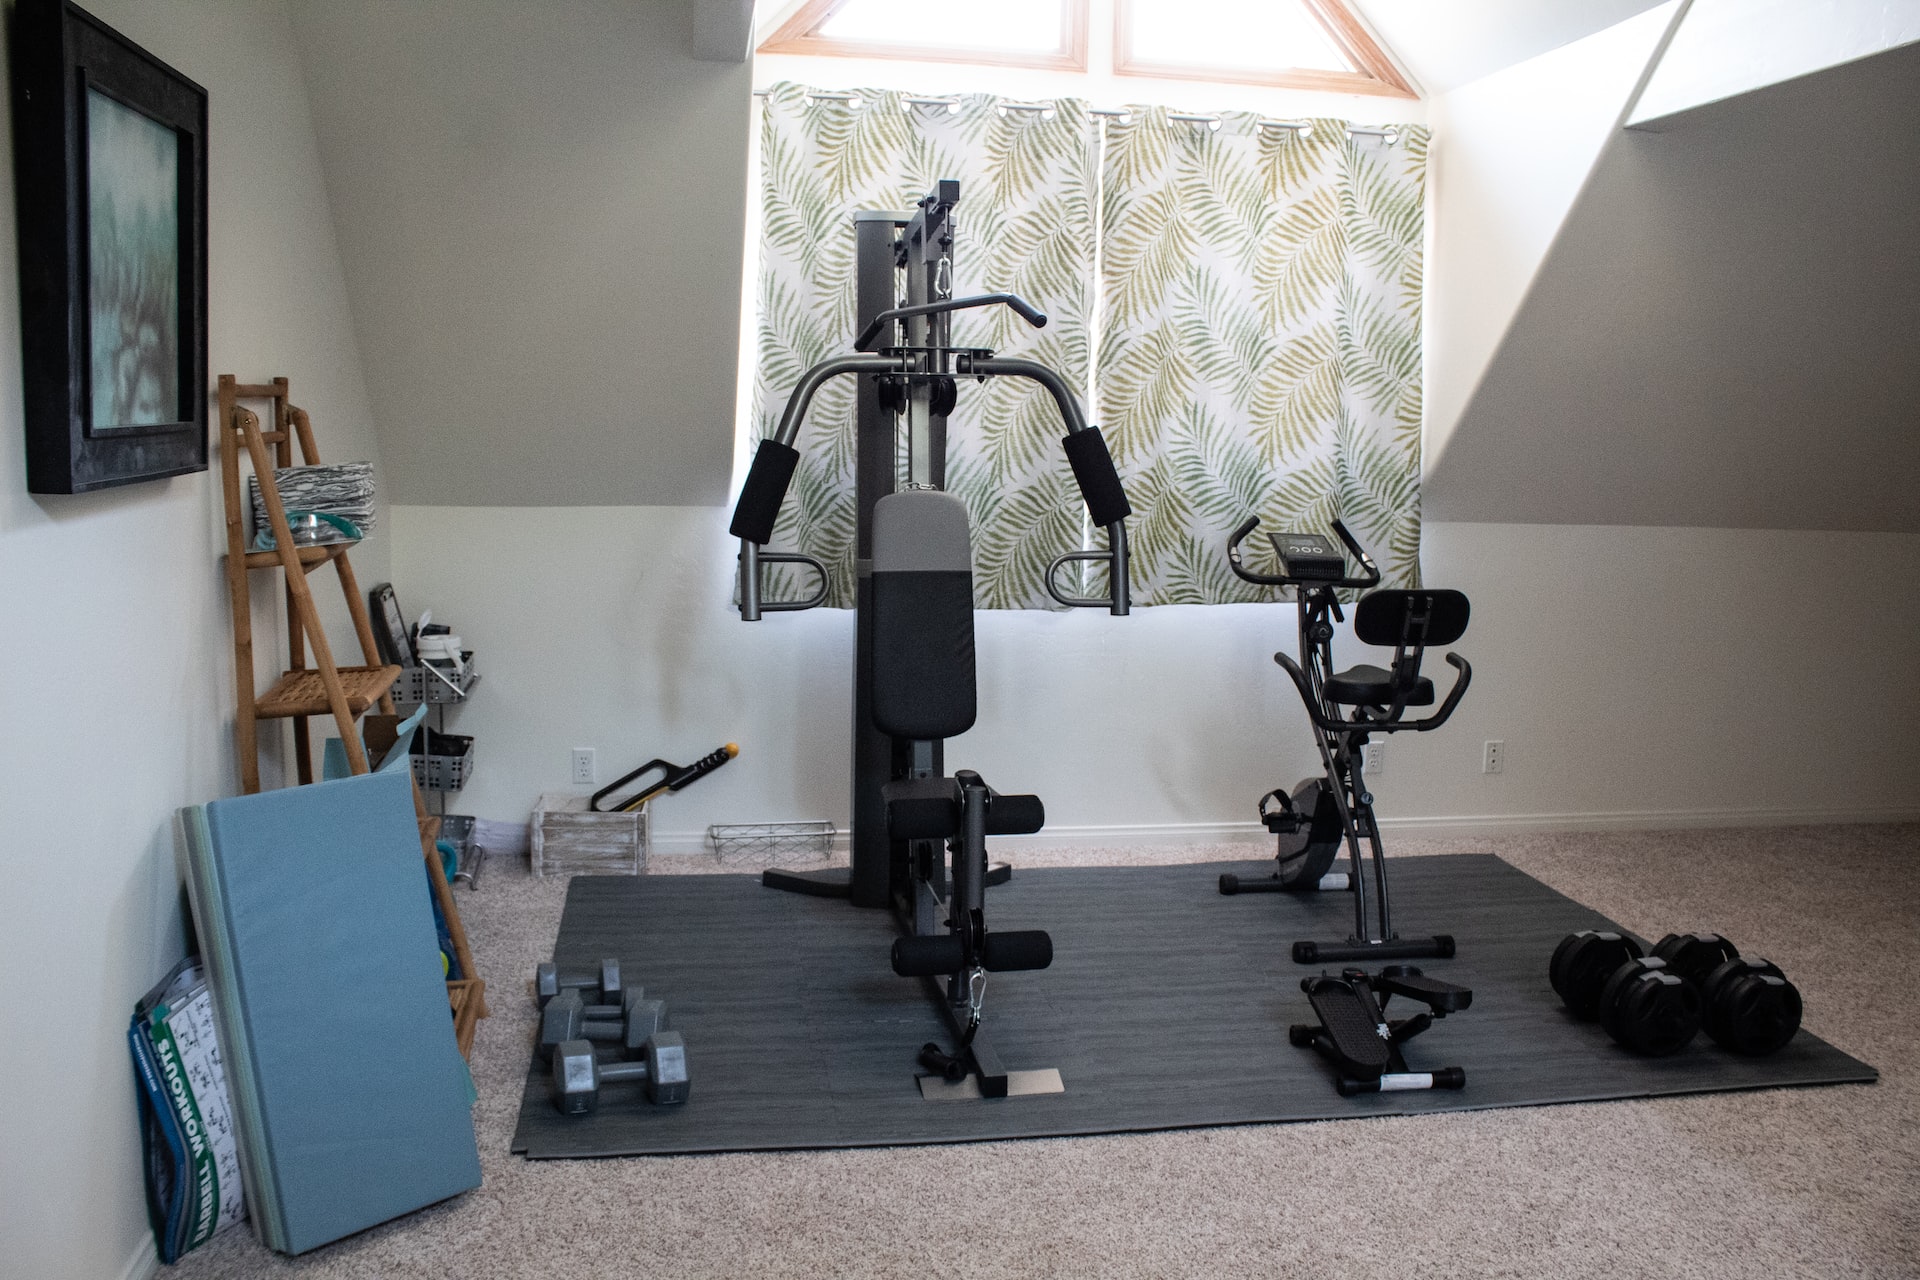 Gym equipment set up at home